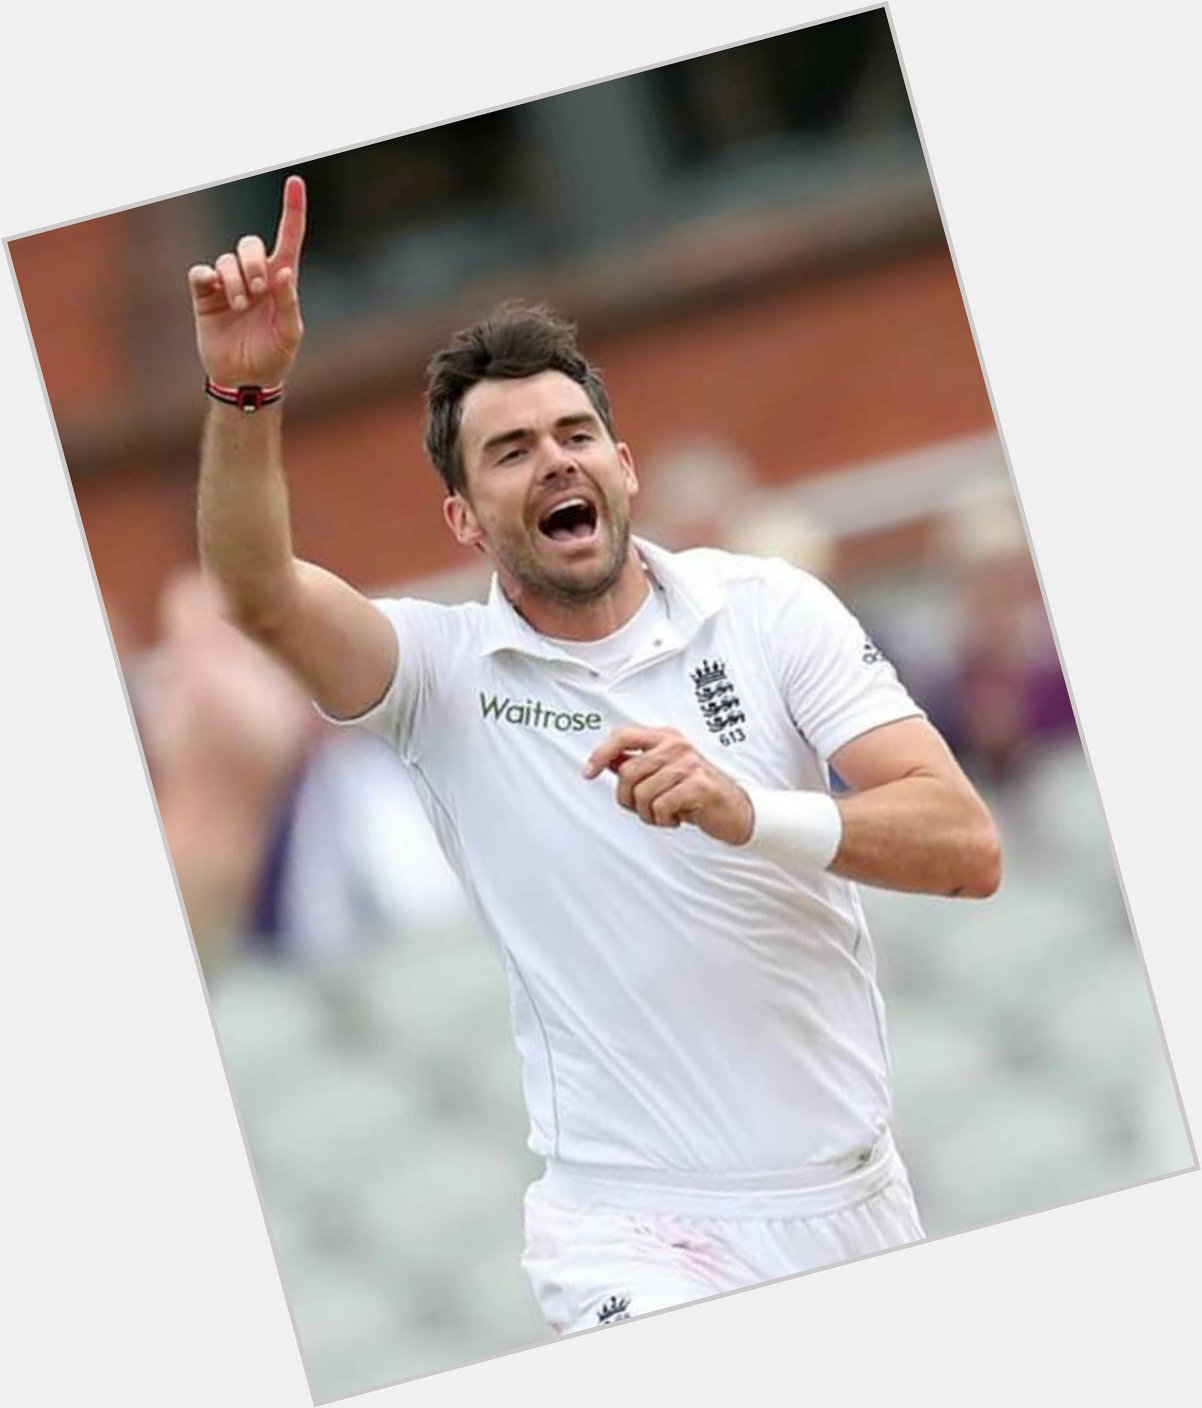 Happy birthday to the no. 1 test bowler James Anderson!  